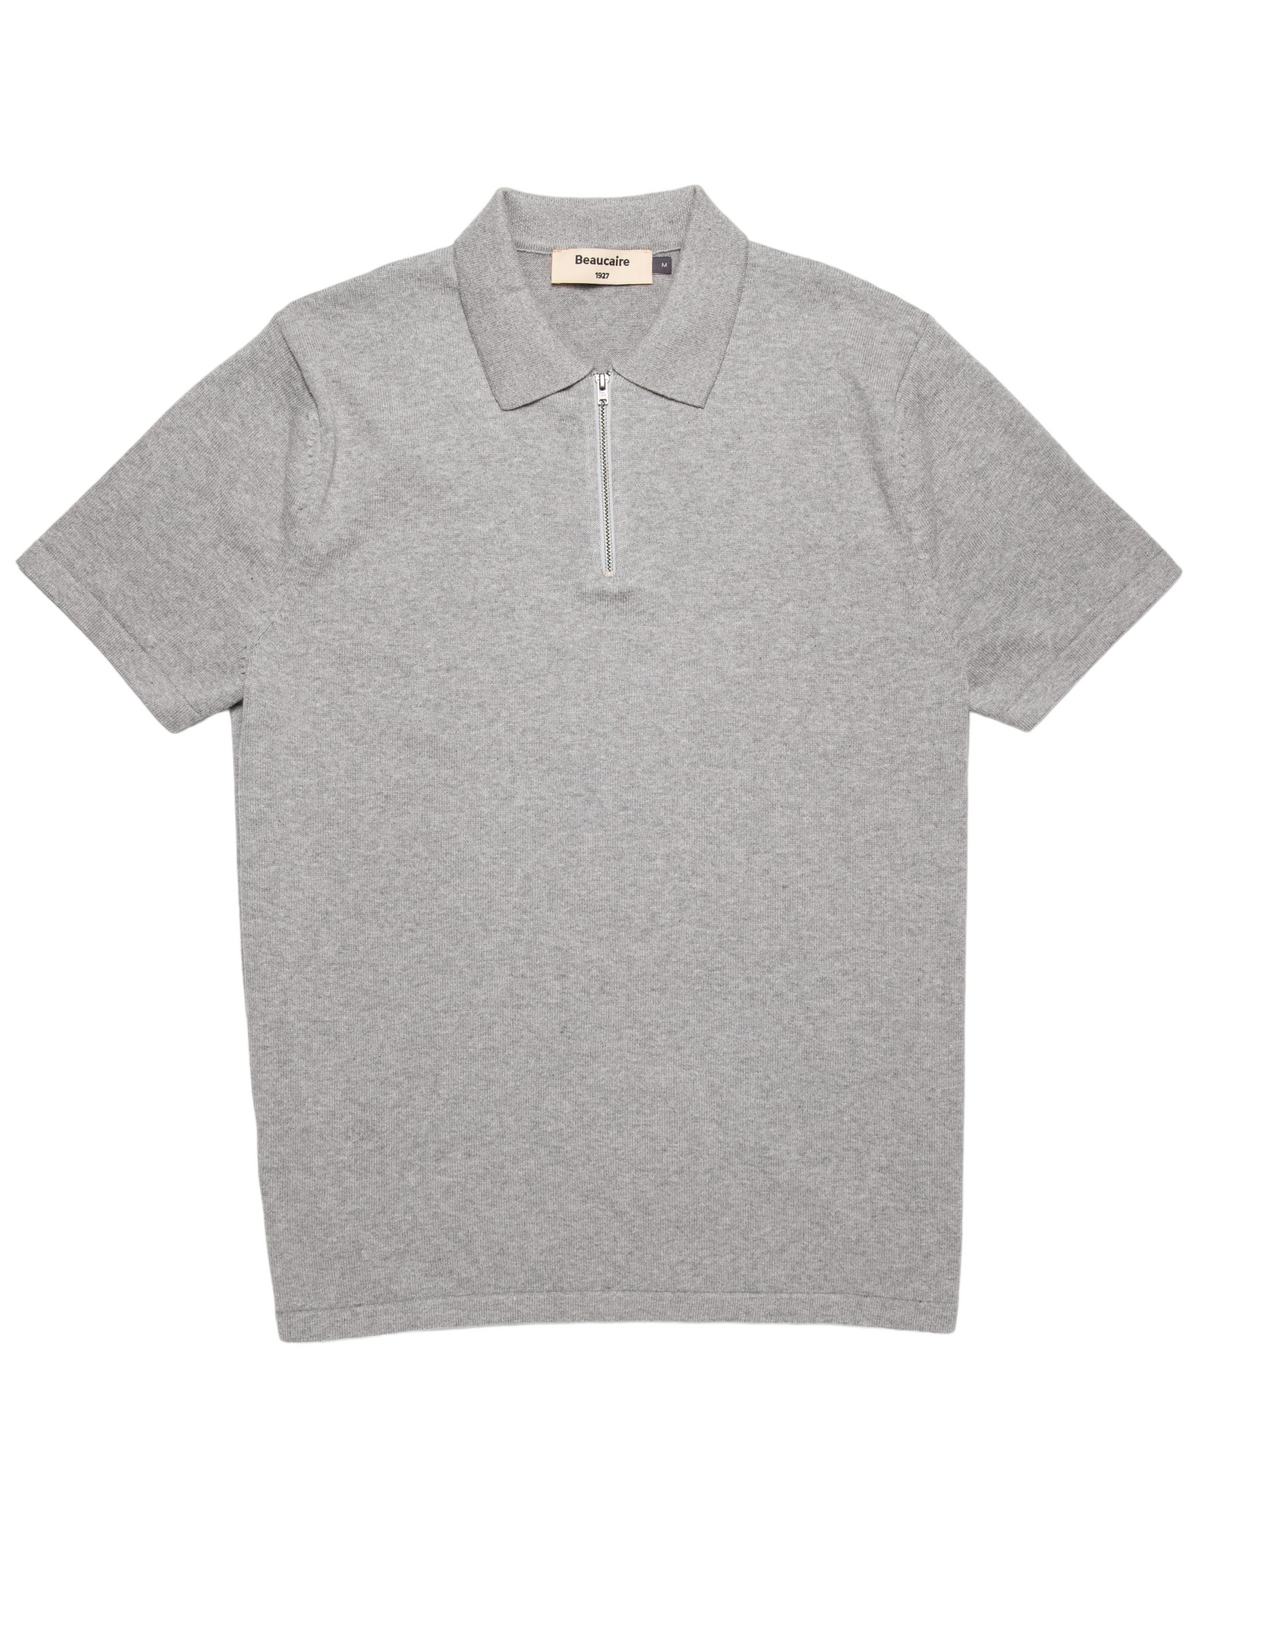 BEAUCAIRE Cotton Zip Neck Short Sleeve Polo MID GREY